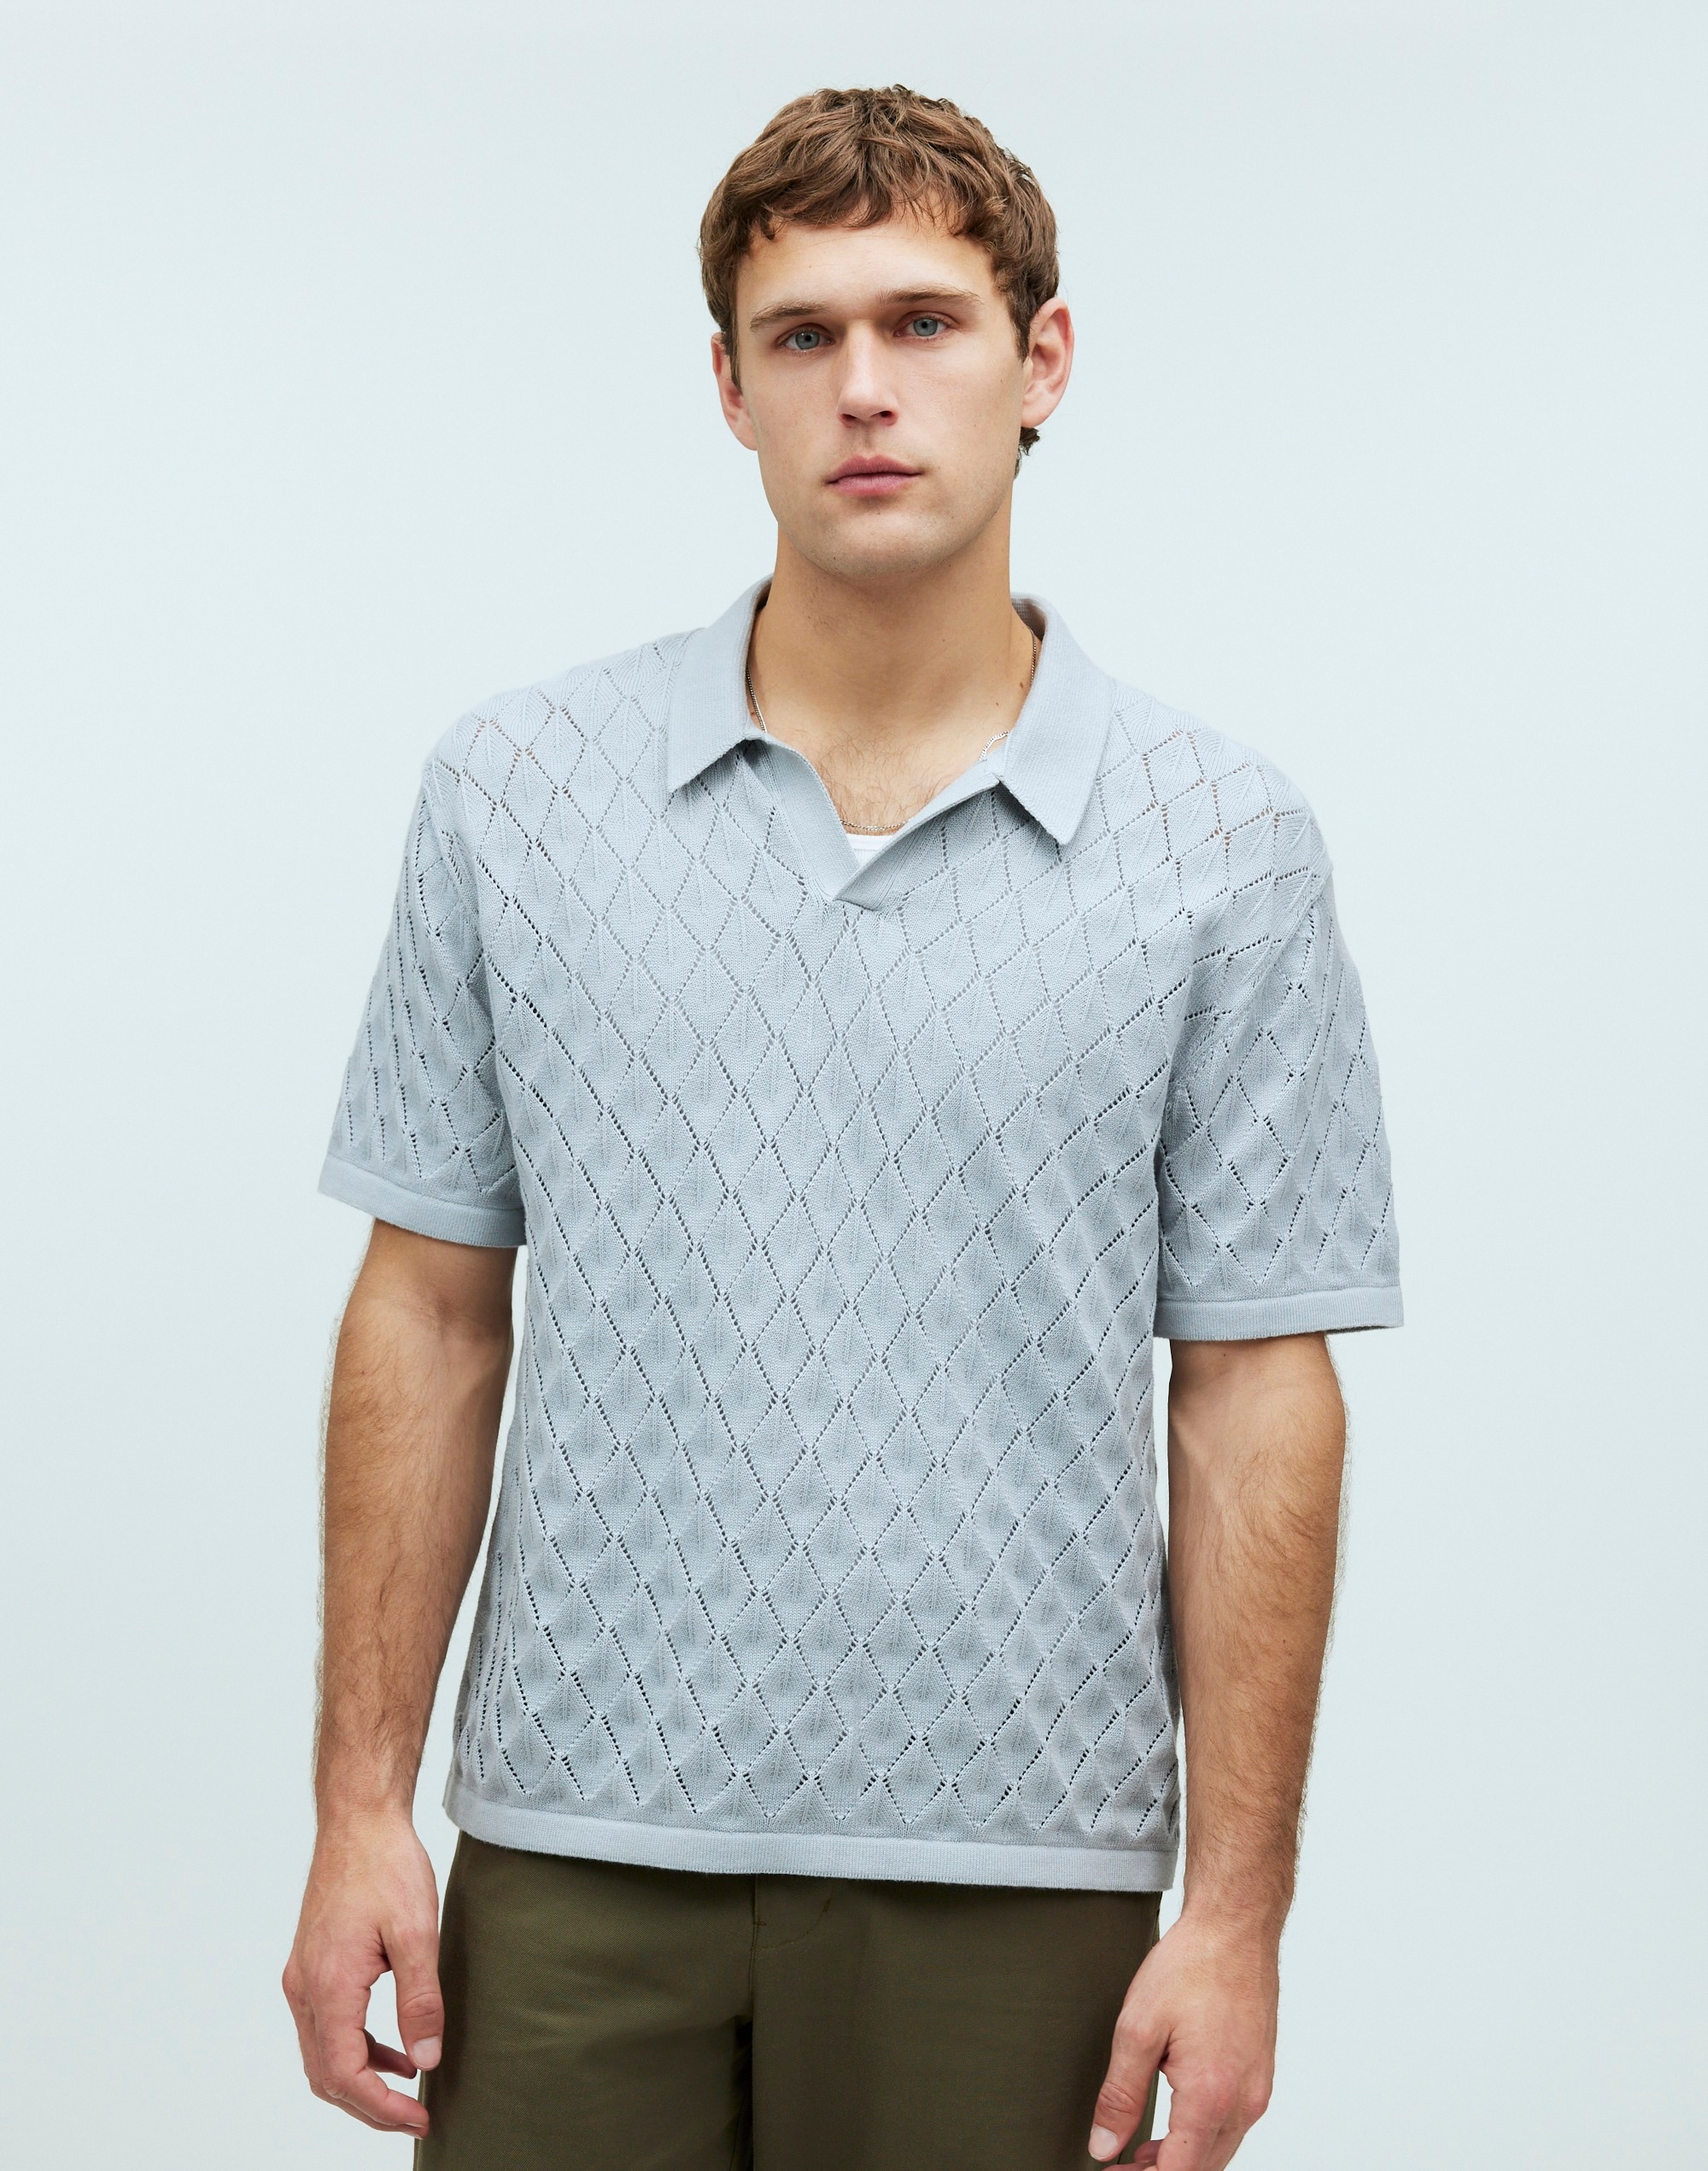 Shop Mw Johnny-collar Sweater Polo Shirt In Glassware Blue